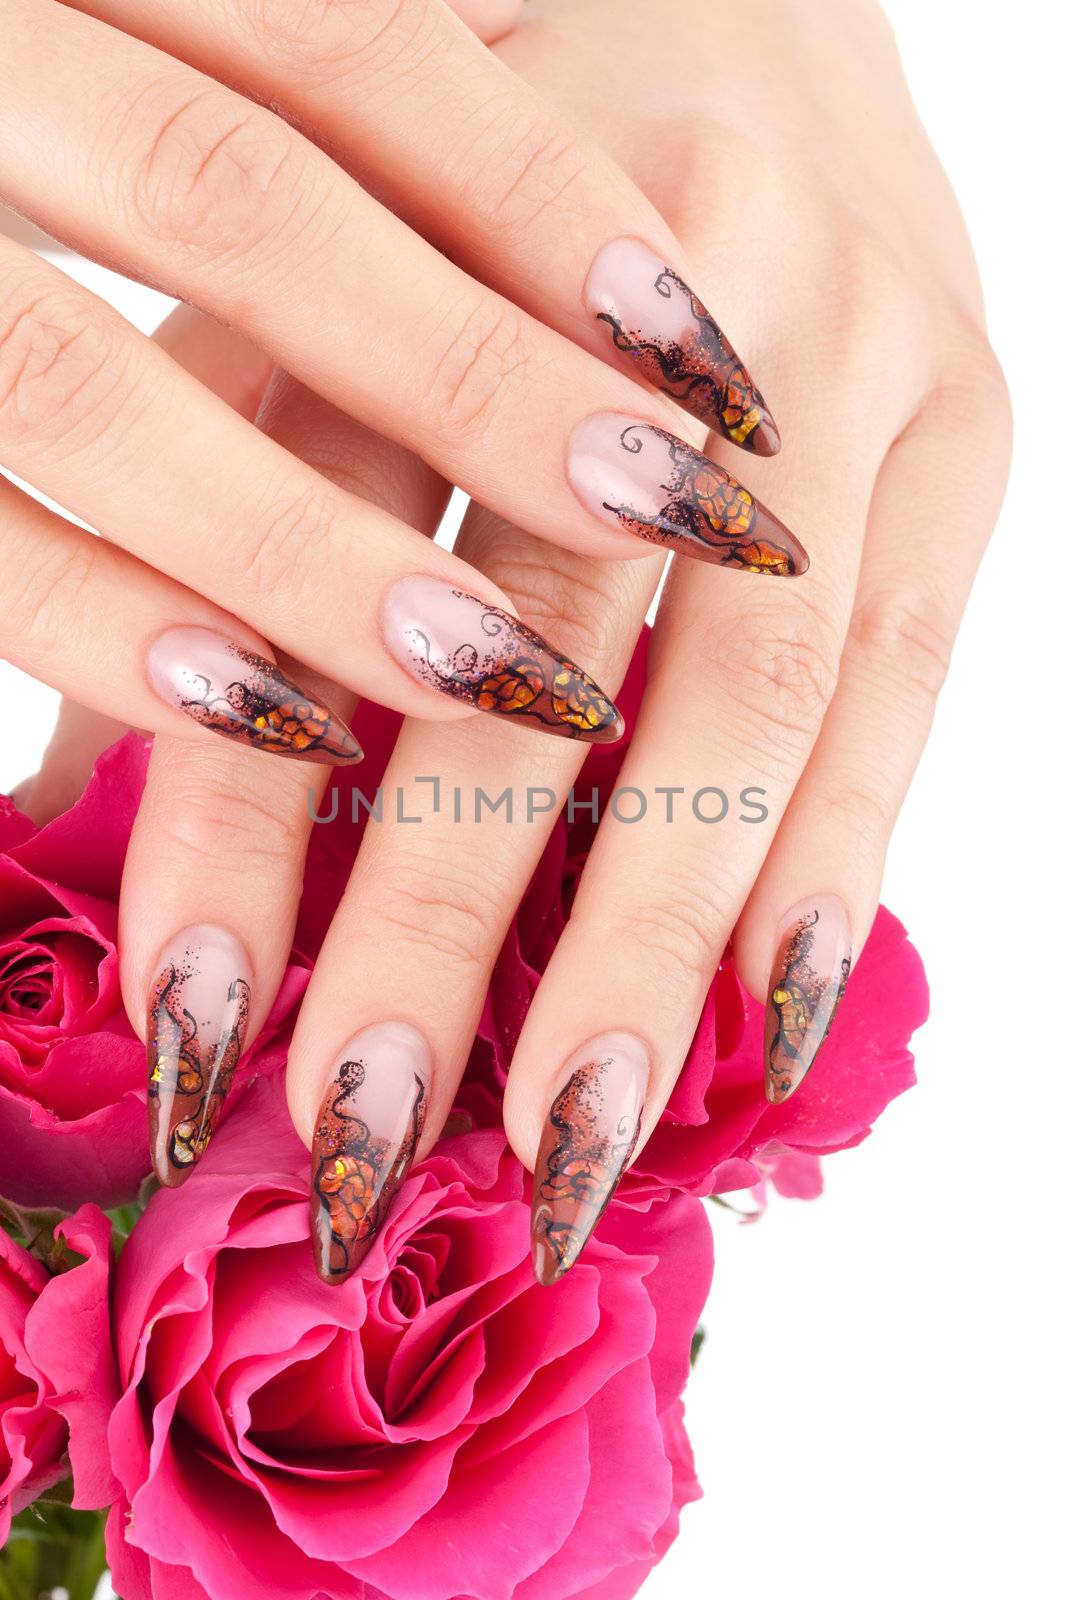 Closeup image of beautiful nails by mihhailov